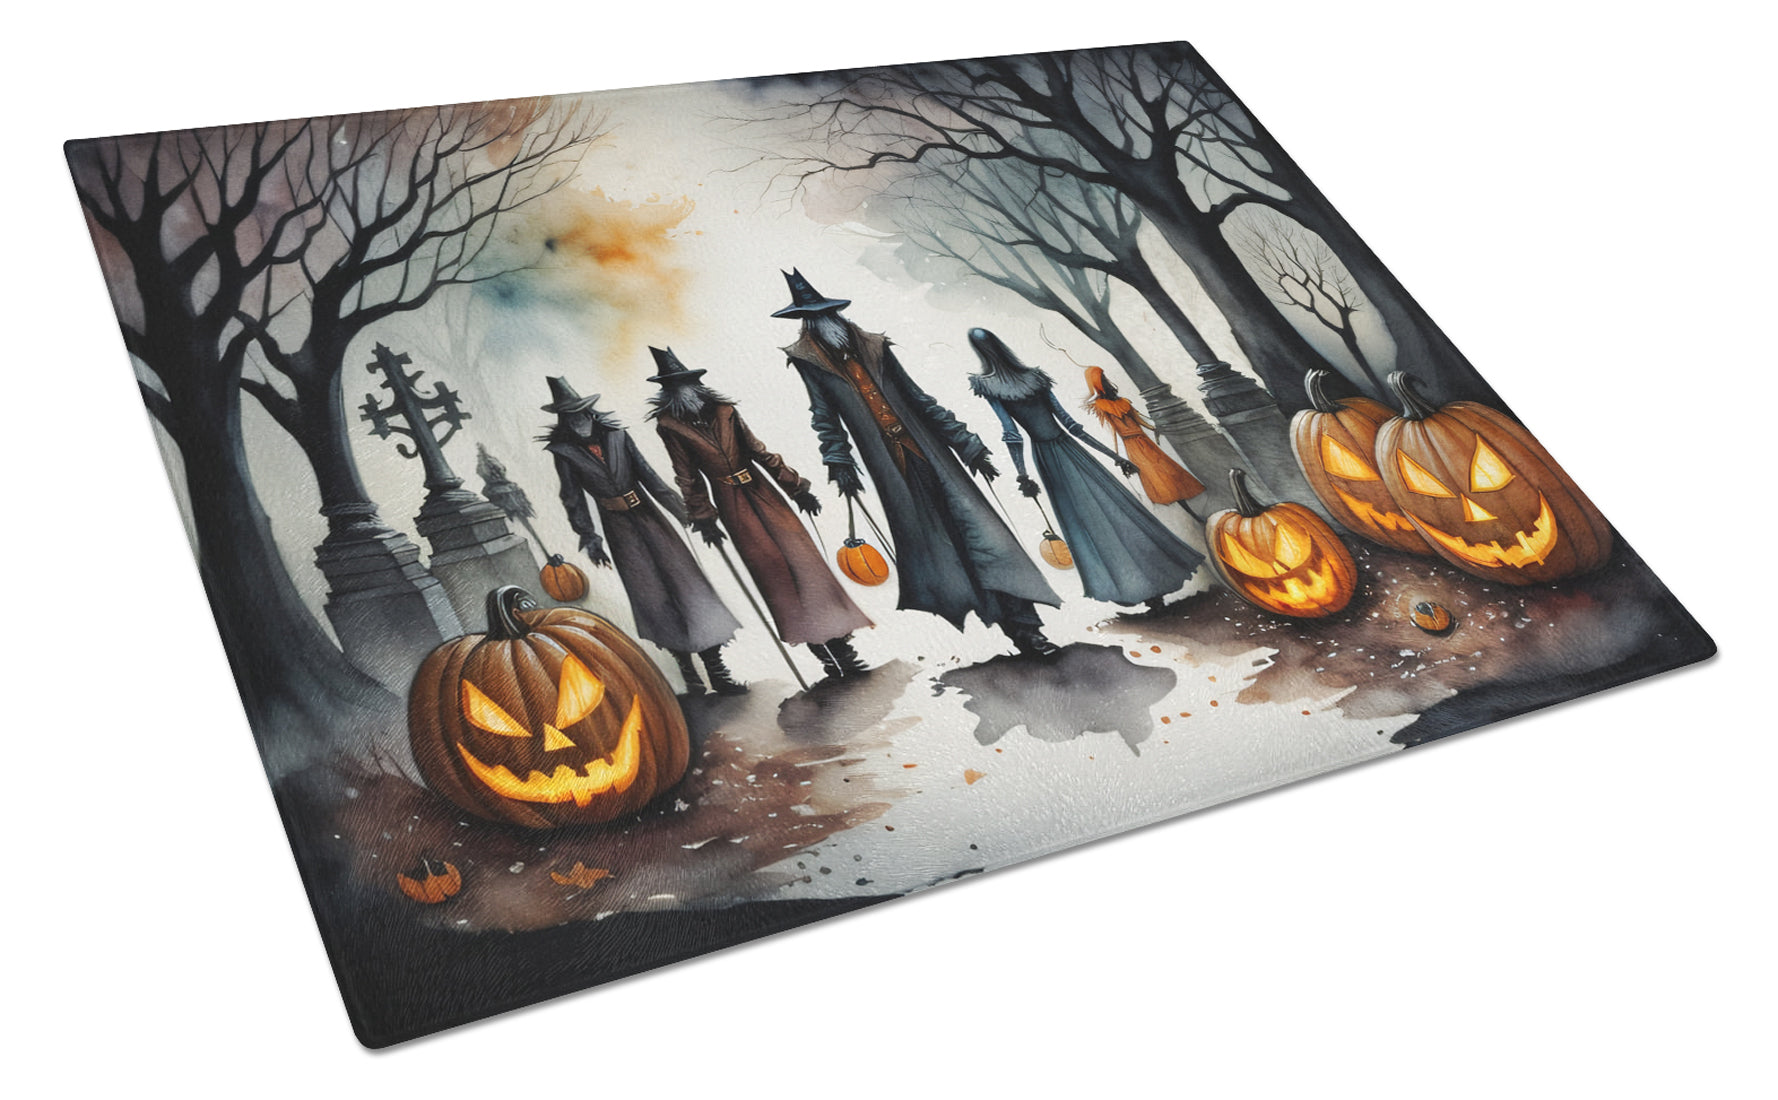 Buy this Vampires Spooky Halloween Glass Cutting Board Large